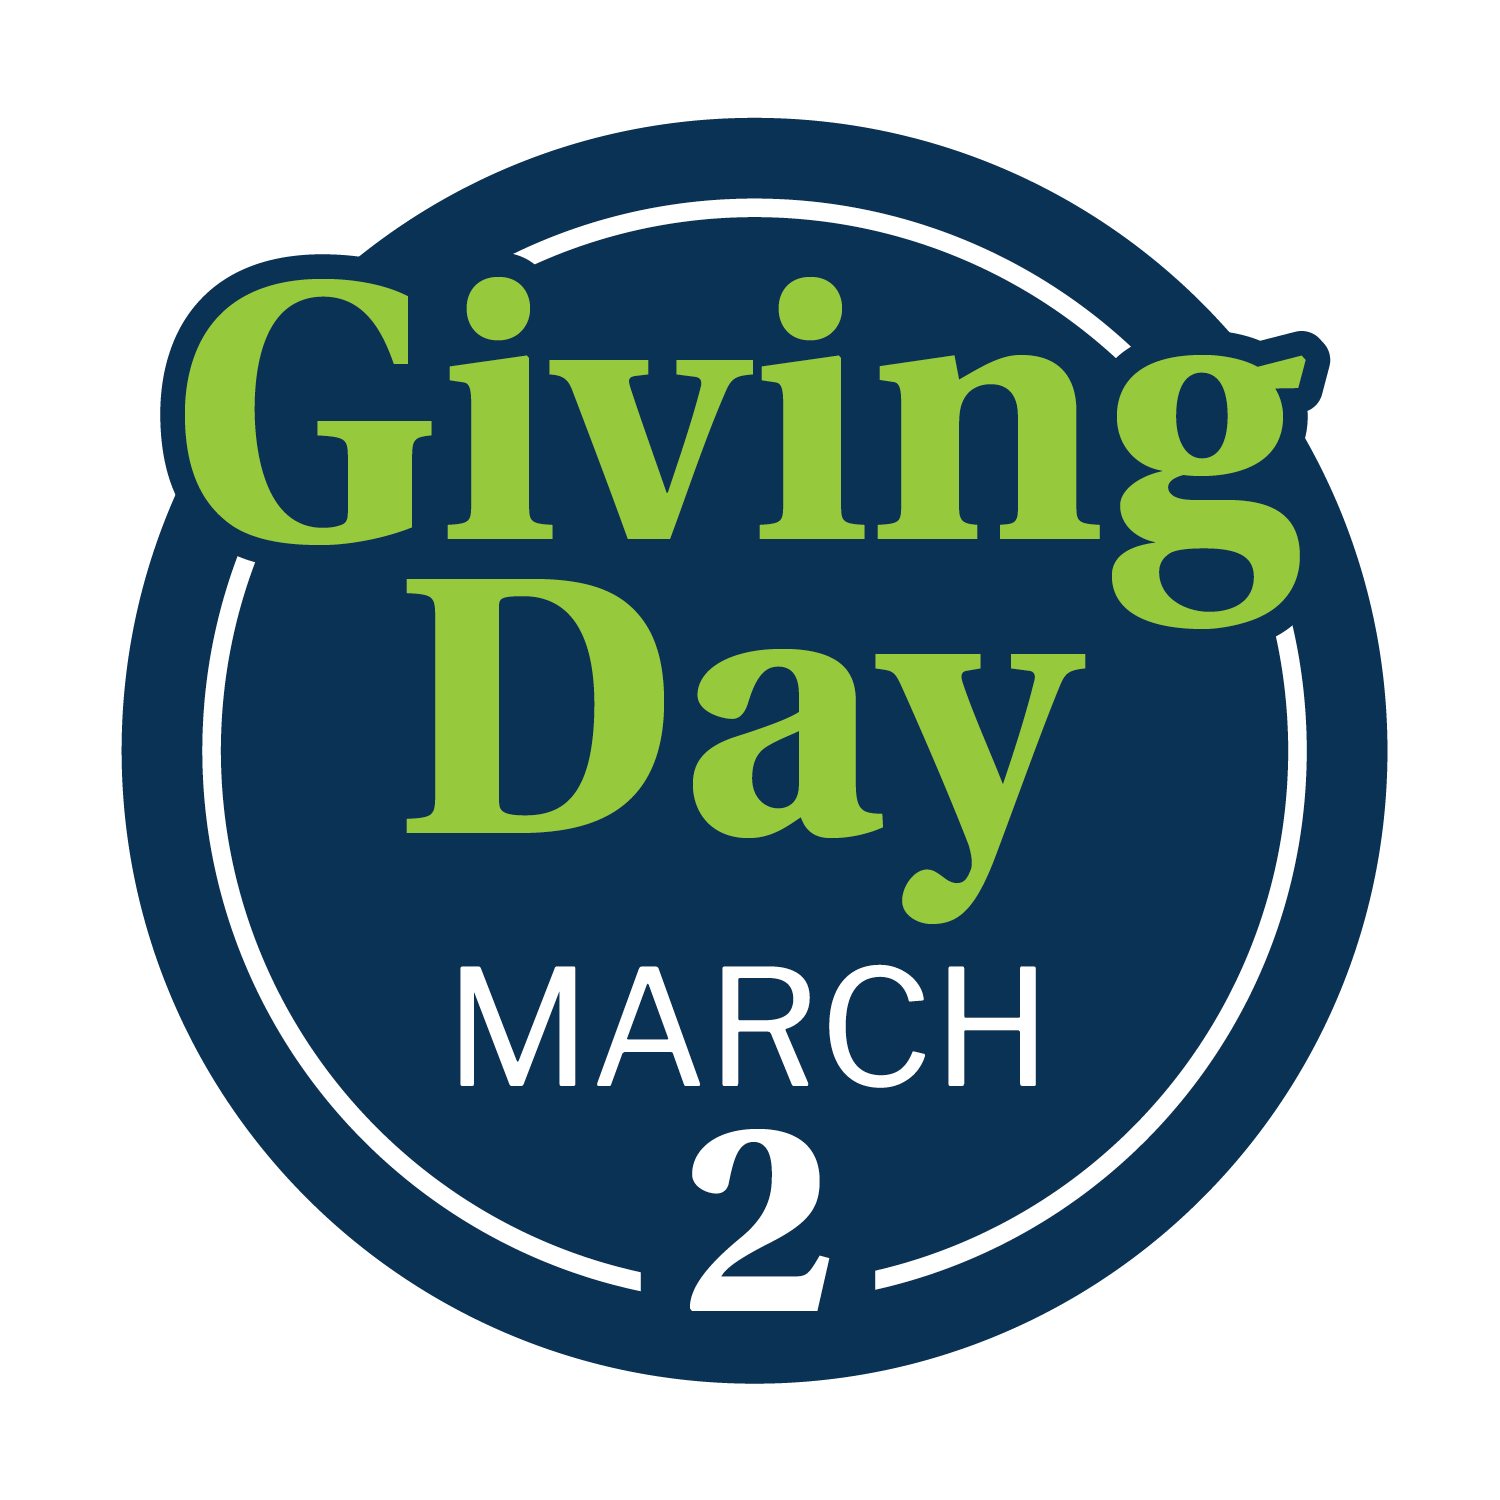 giving day march 2 logo 2022